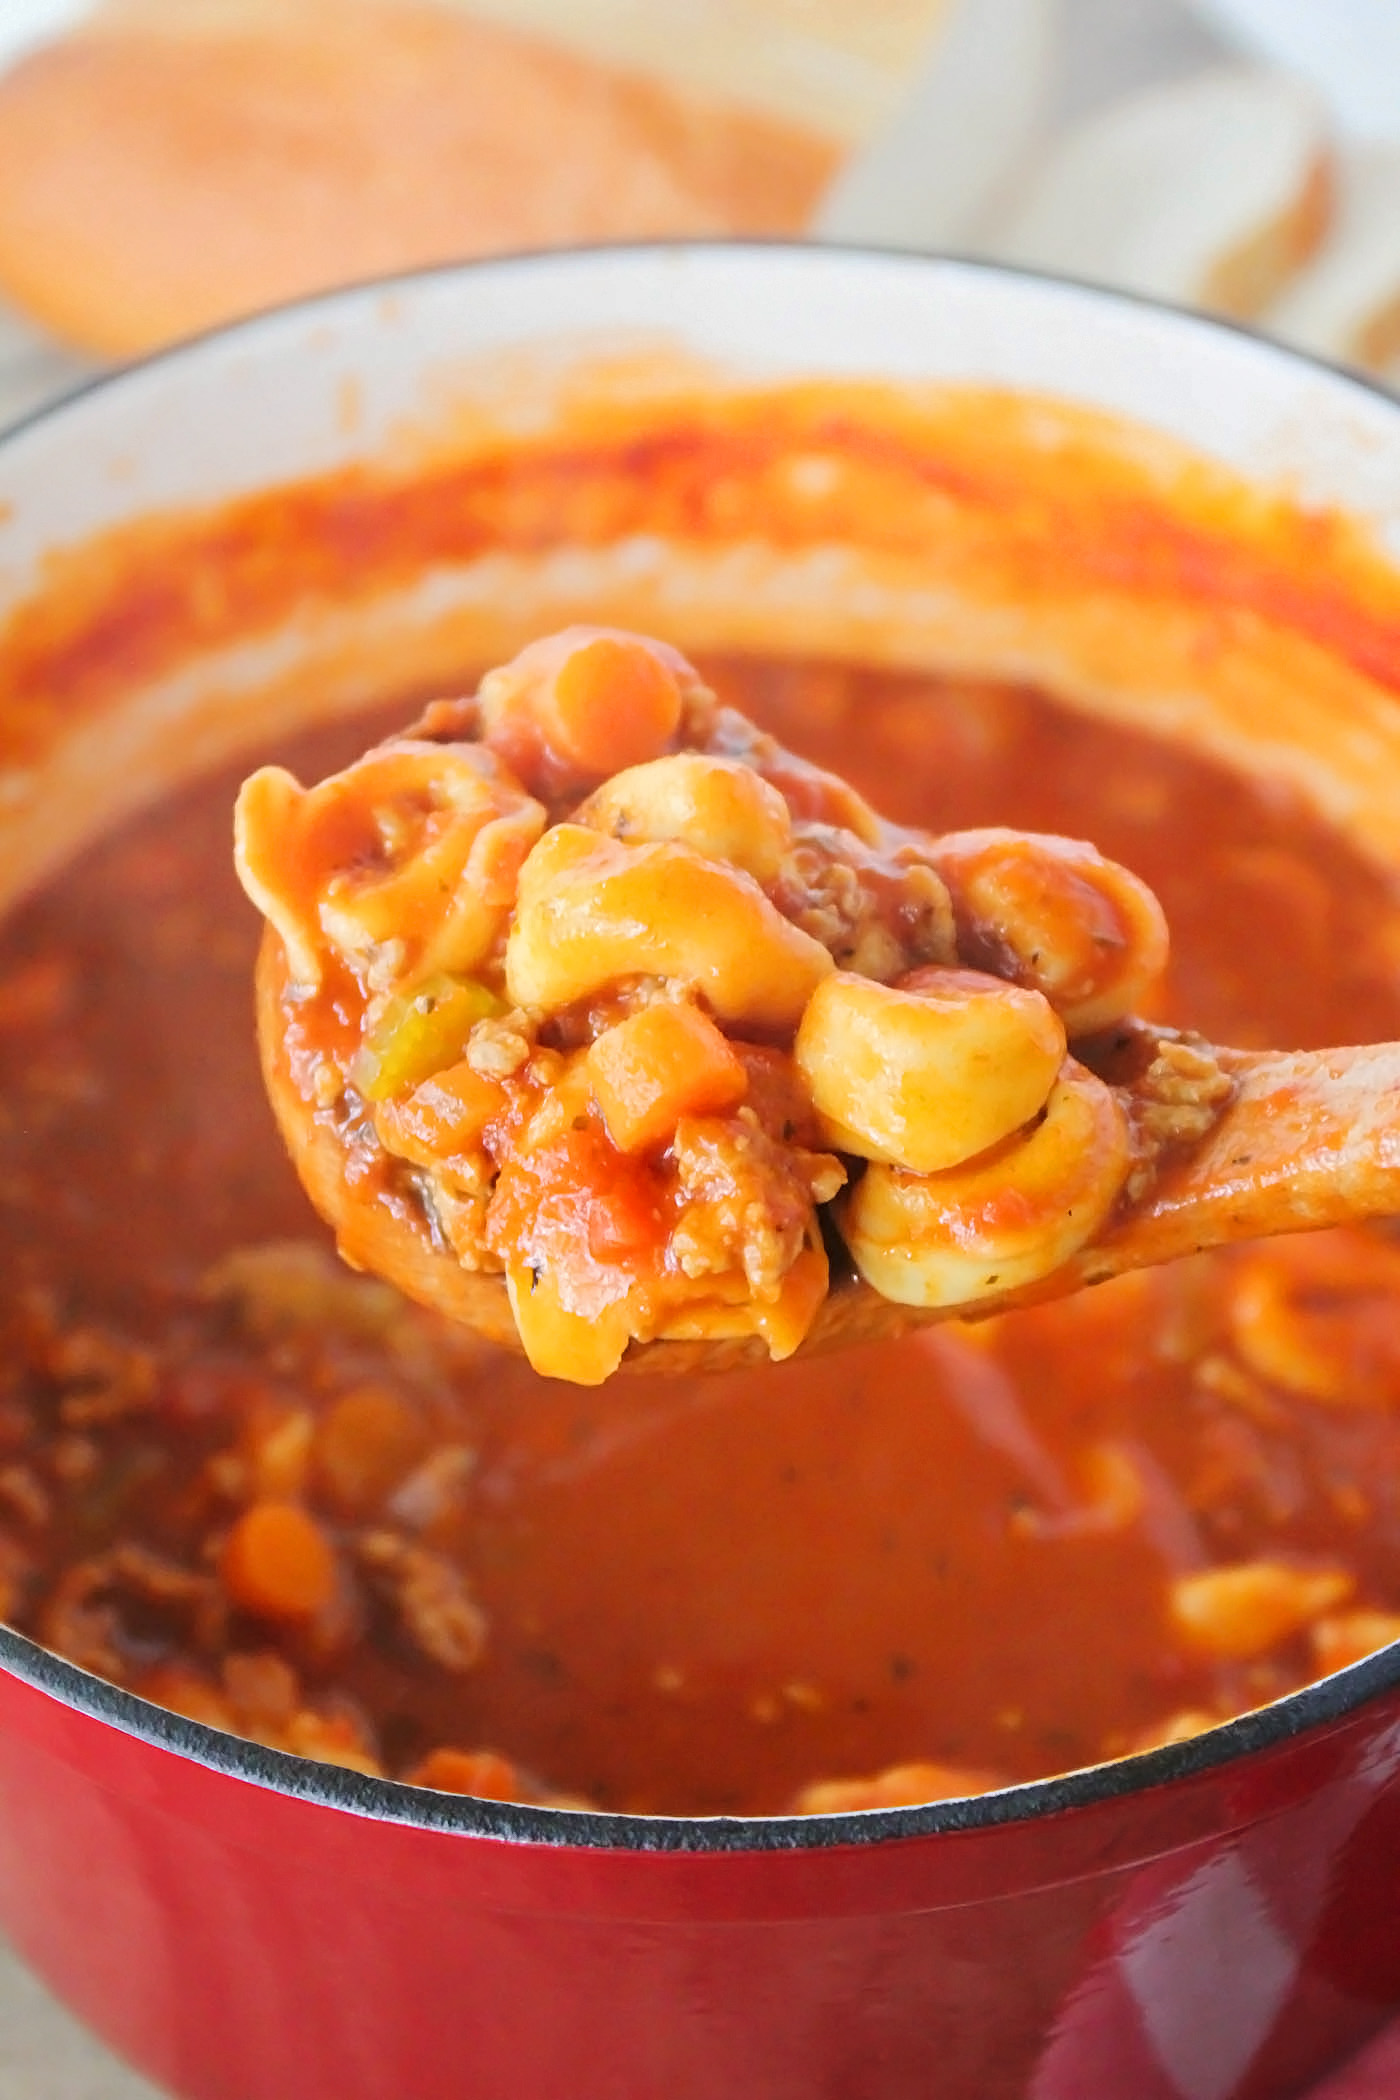 Short on time and need a hearty meal on the table? This Quick and Easy Tomato Tortellini Soup is your go-to for dinner!